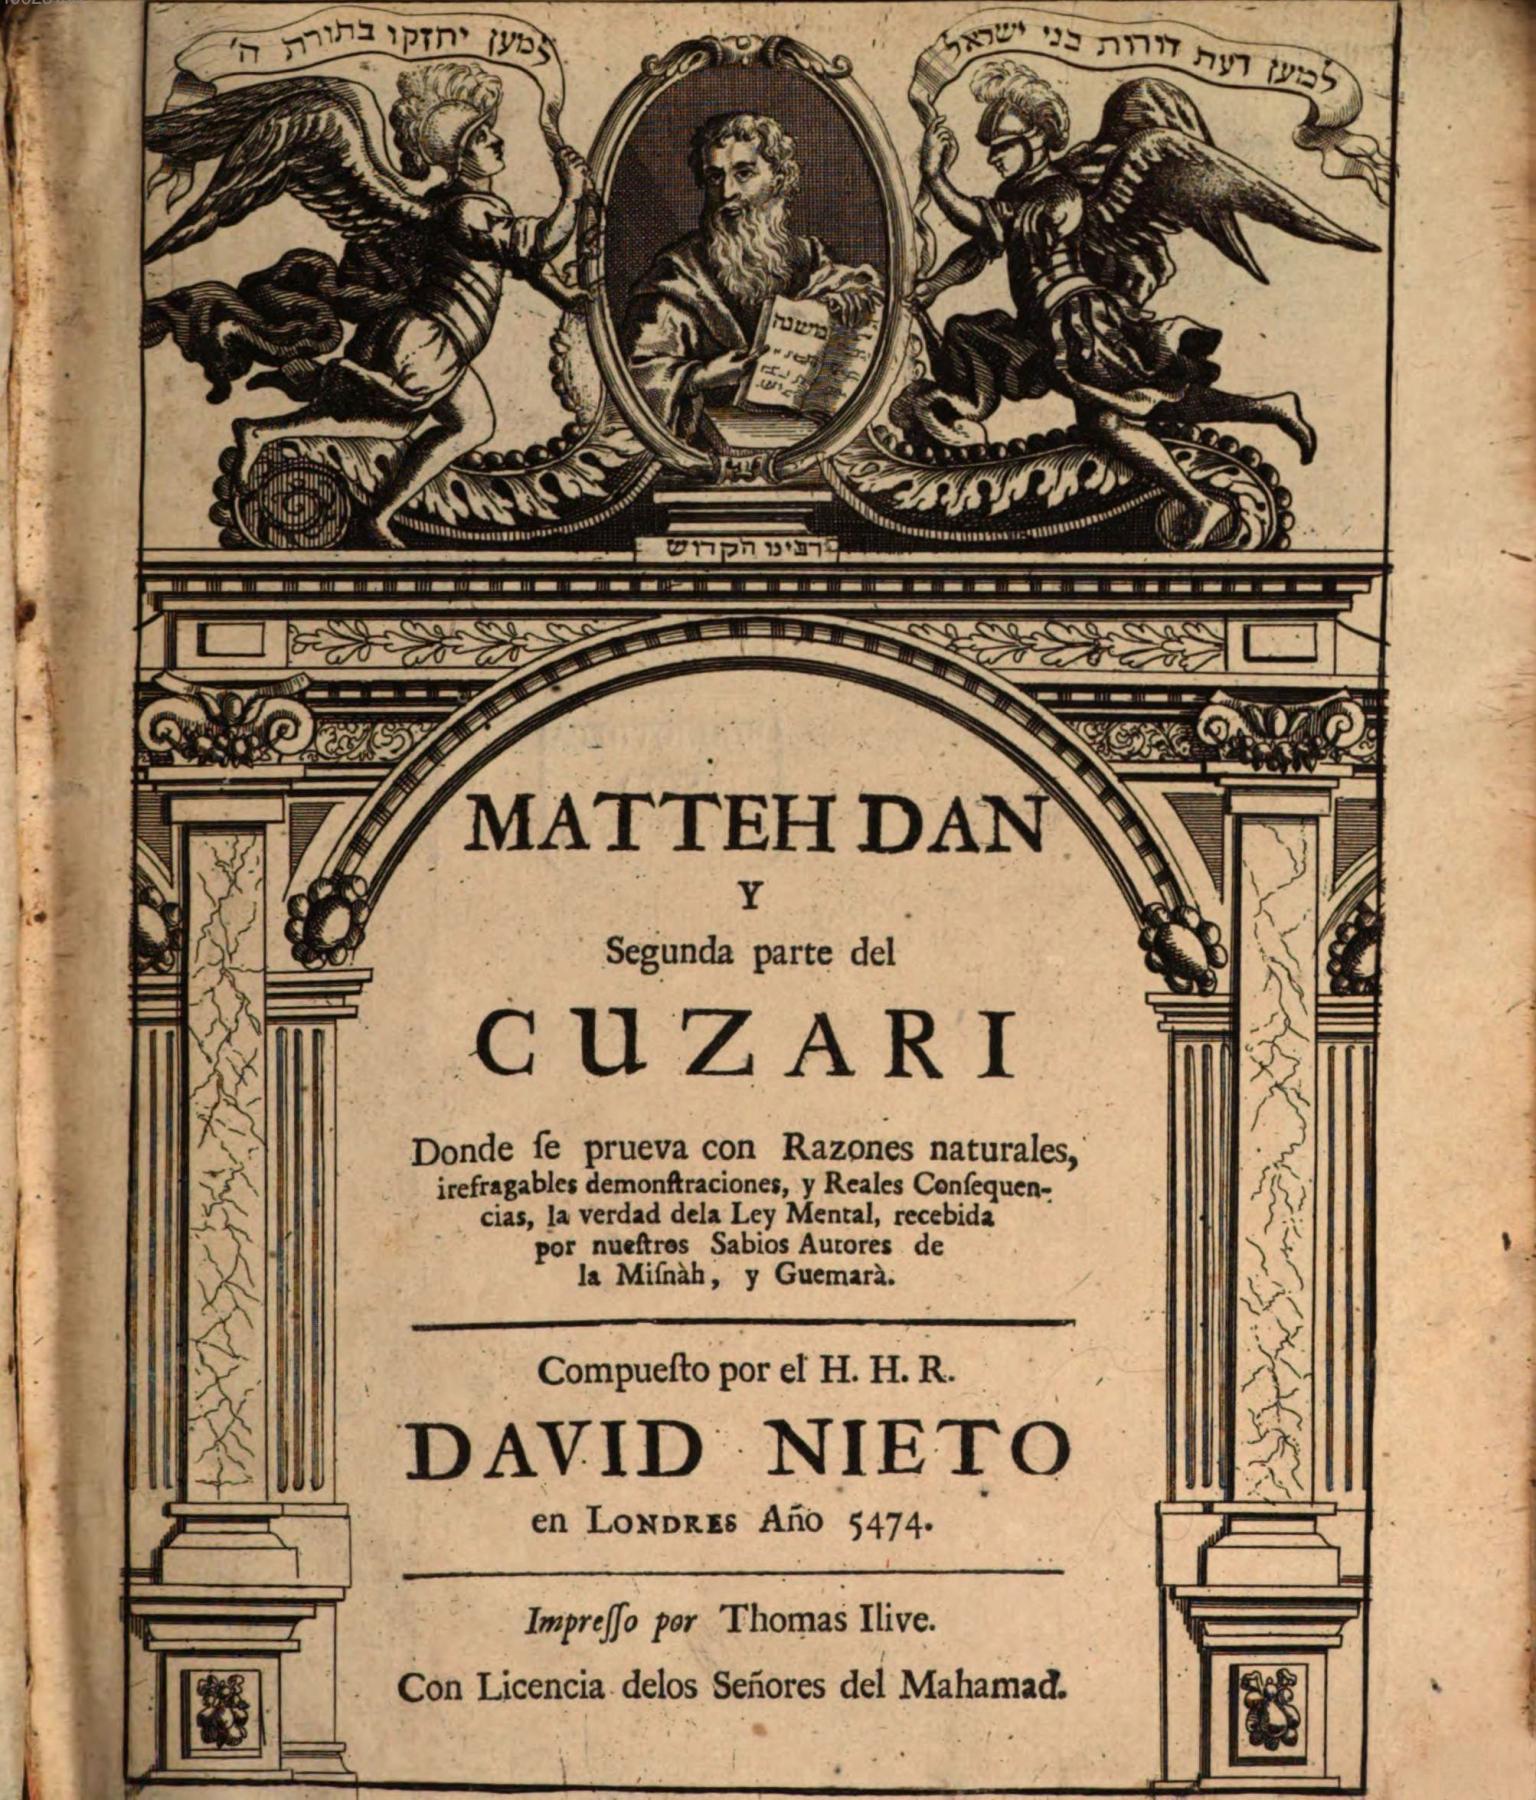 Printed page of Spanish text under decorative, columned archway with lintel featuring winged men with helmets holding banners on either side of portrait of bearded man holding a book.